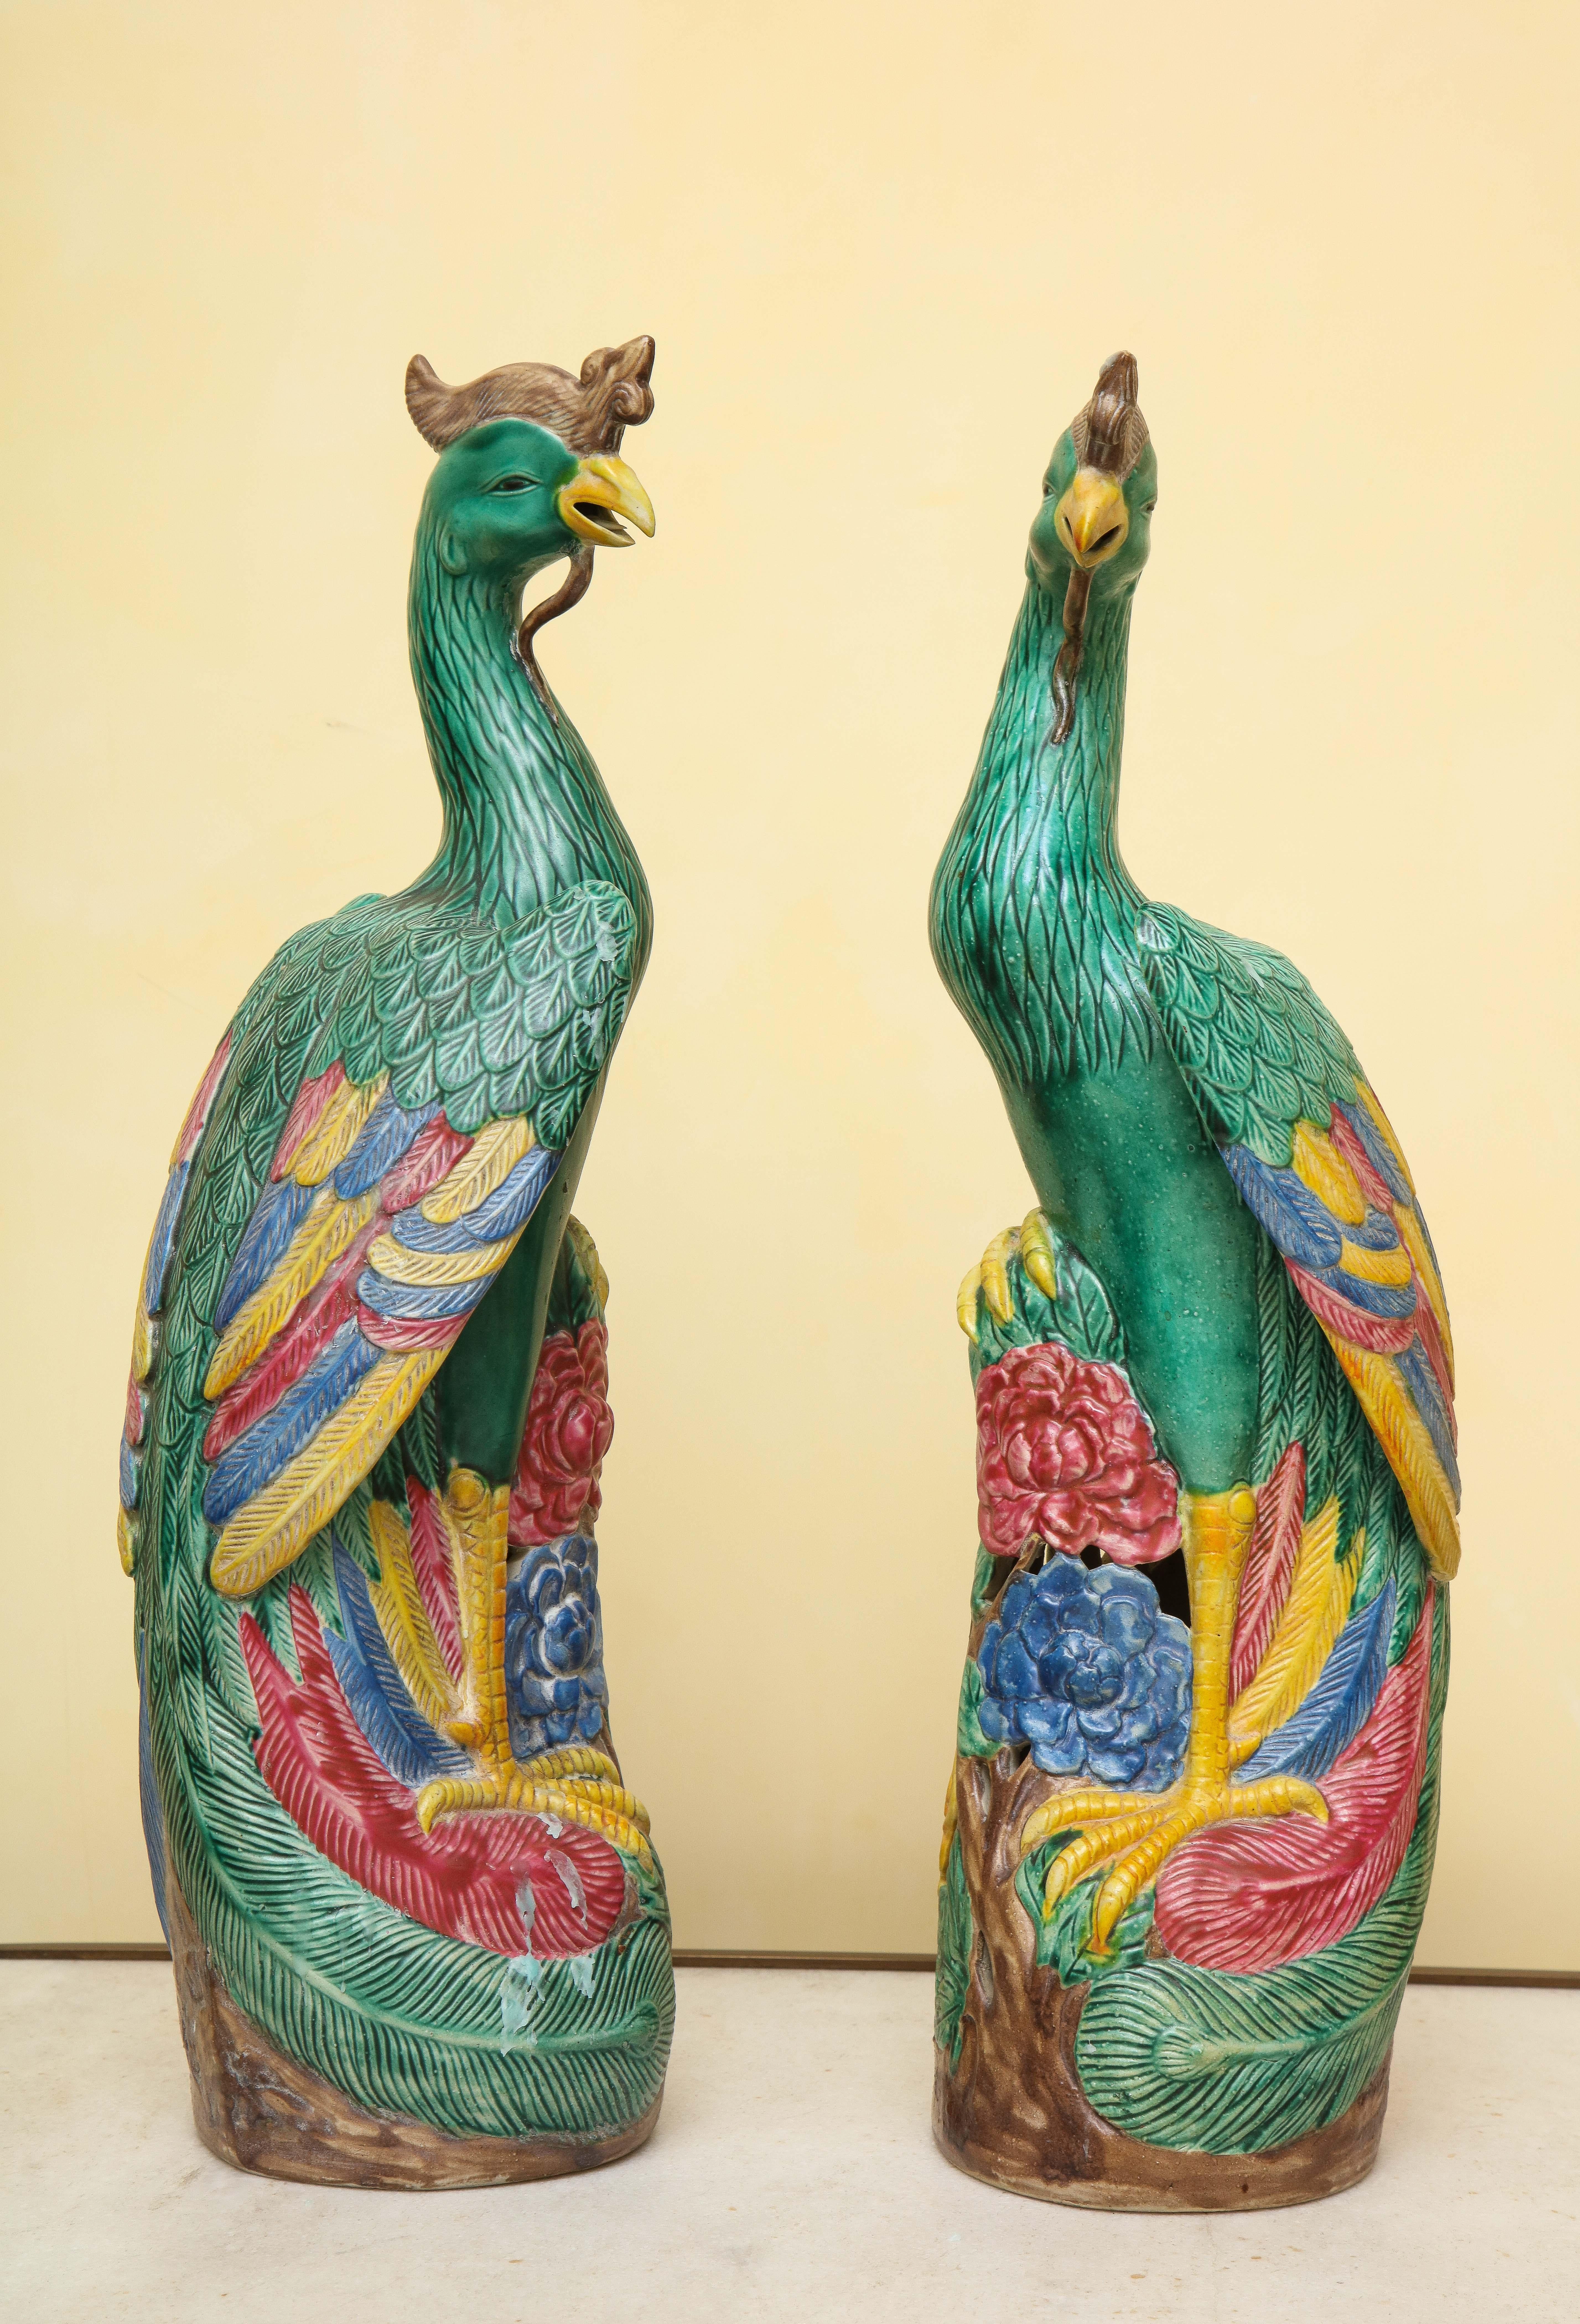 20th Century Pair of Chinese Export-Style Porcelain Ho-Ho Phoenix Birds For Sale